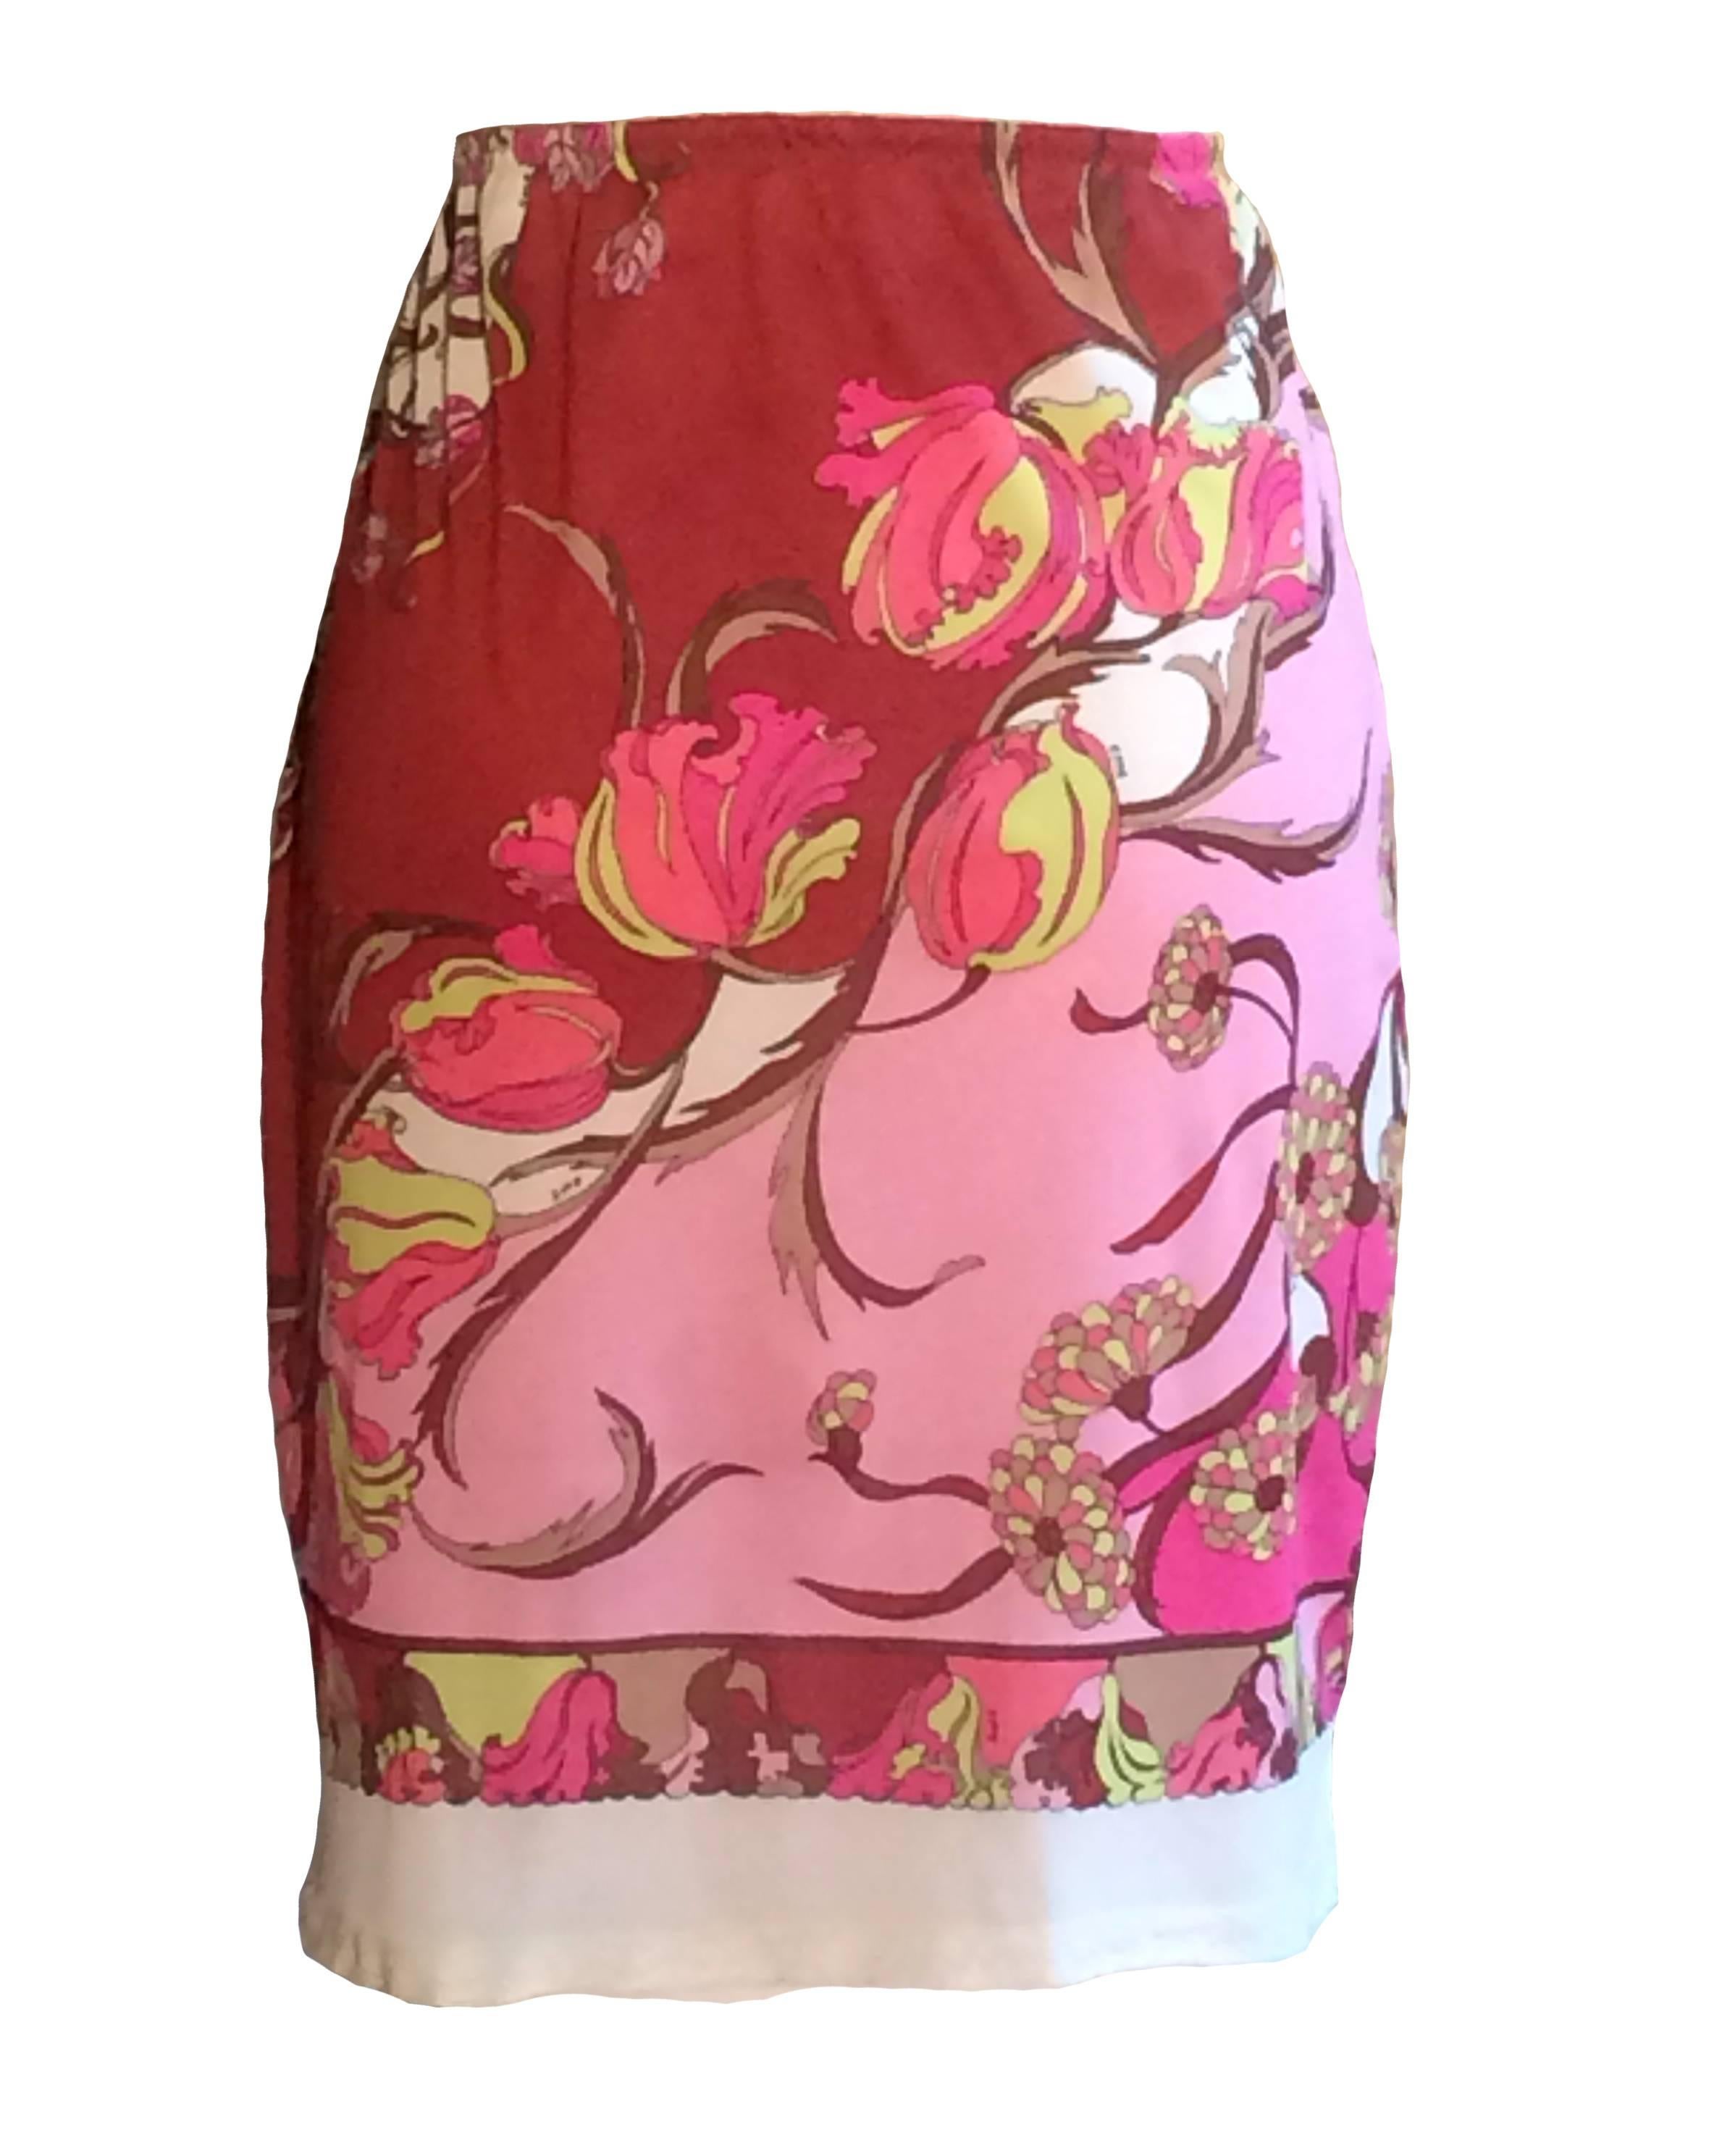 Emilio Pucci for Formfit Rogers 1960's pink floral Pucci print slip skirt with elastic waist and lace trim. Signed EPFR throughout. Makes a great pool cover up!

No content label, feels like a synthetic.

Created in Italy, made in USA.

Size